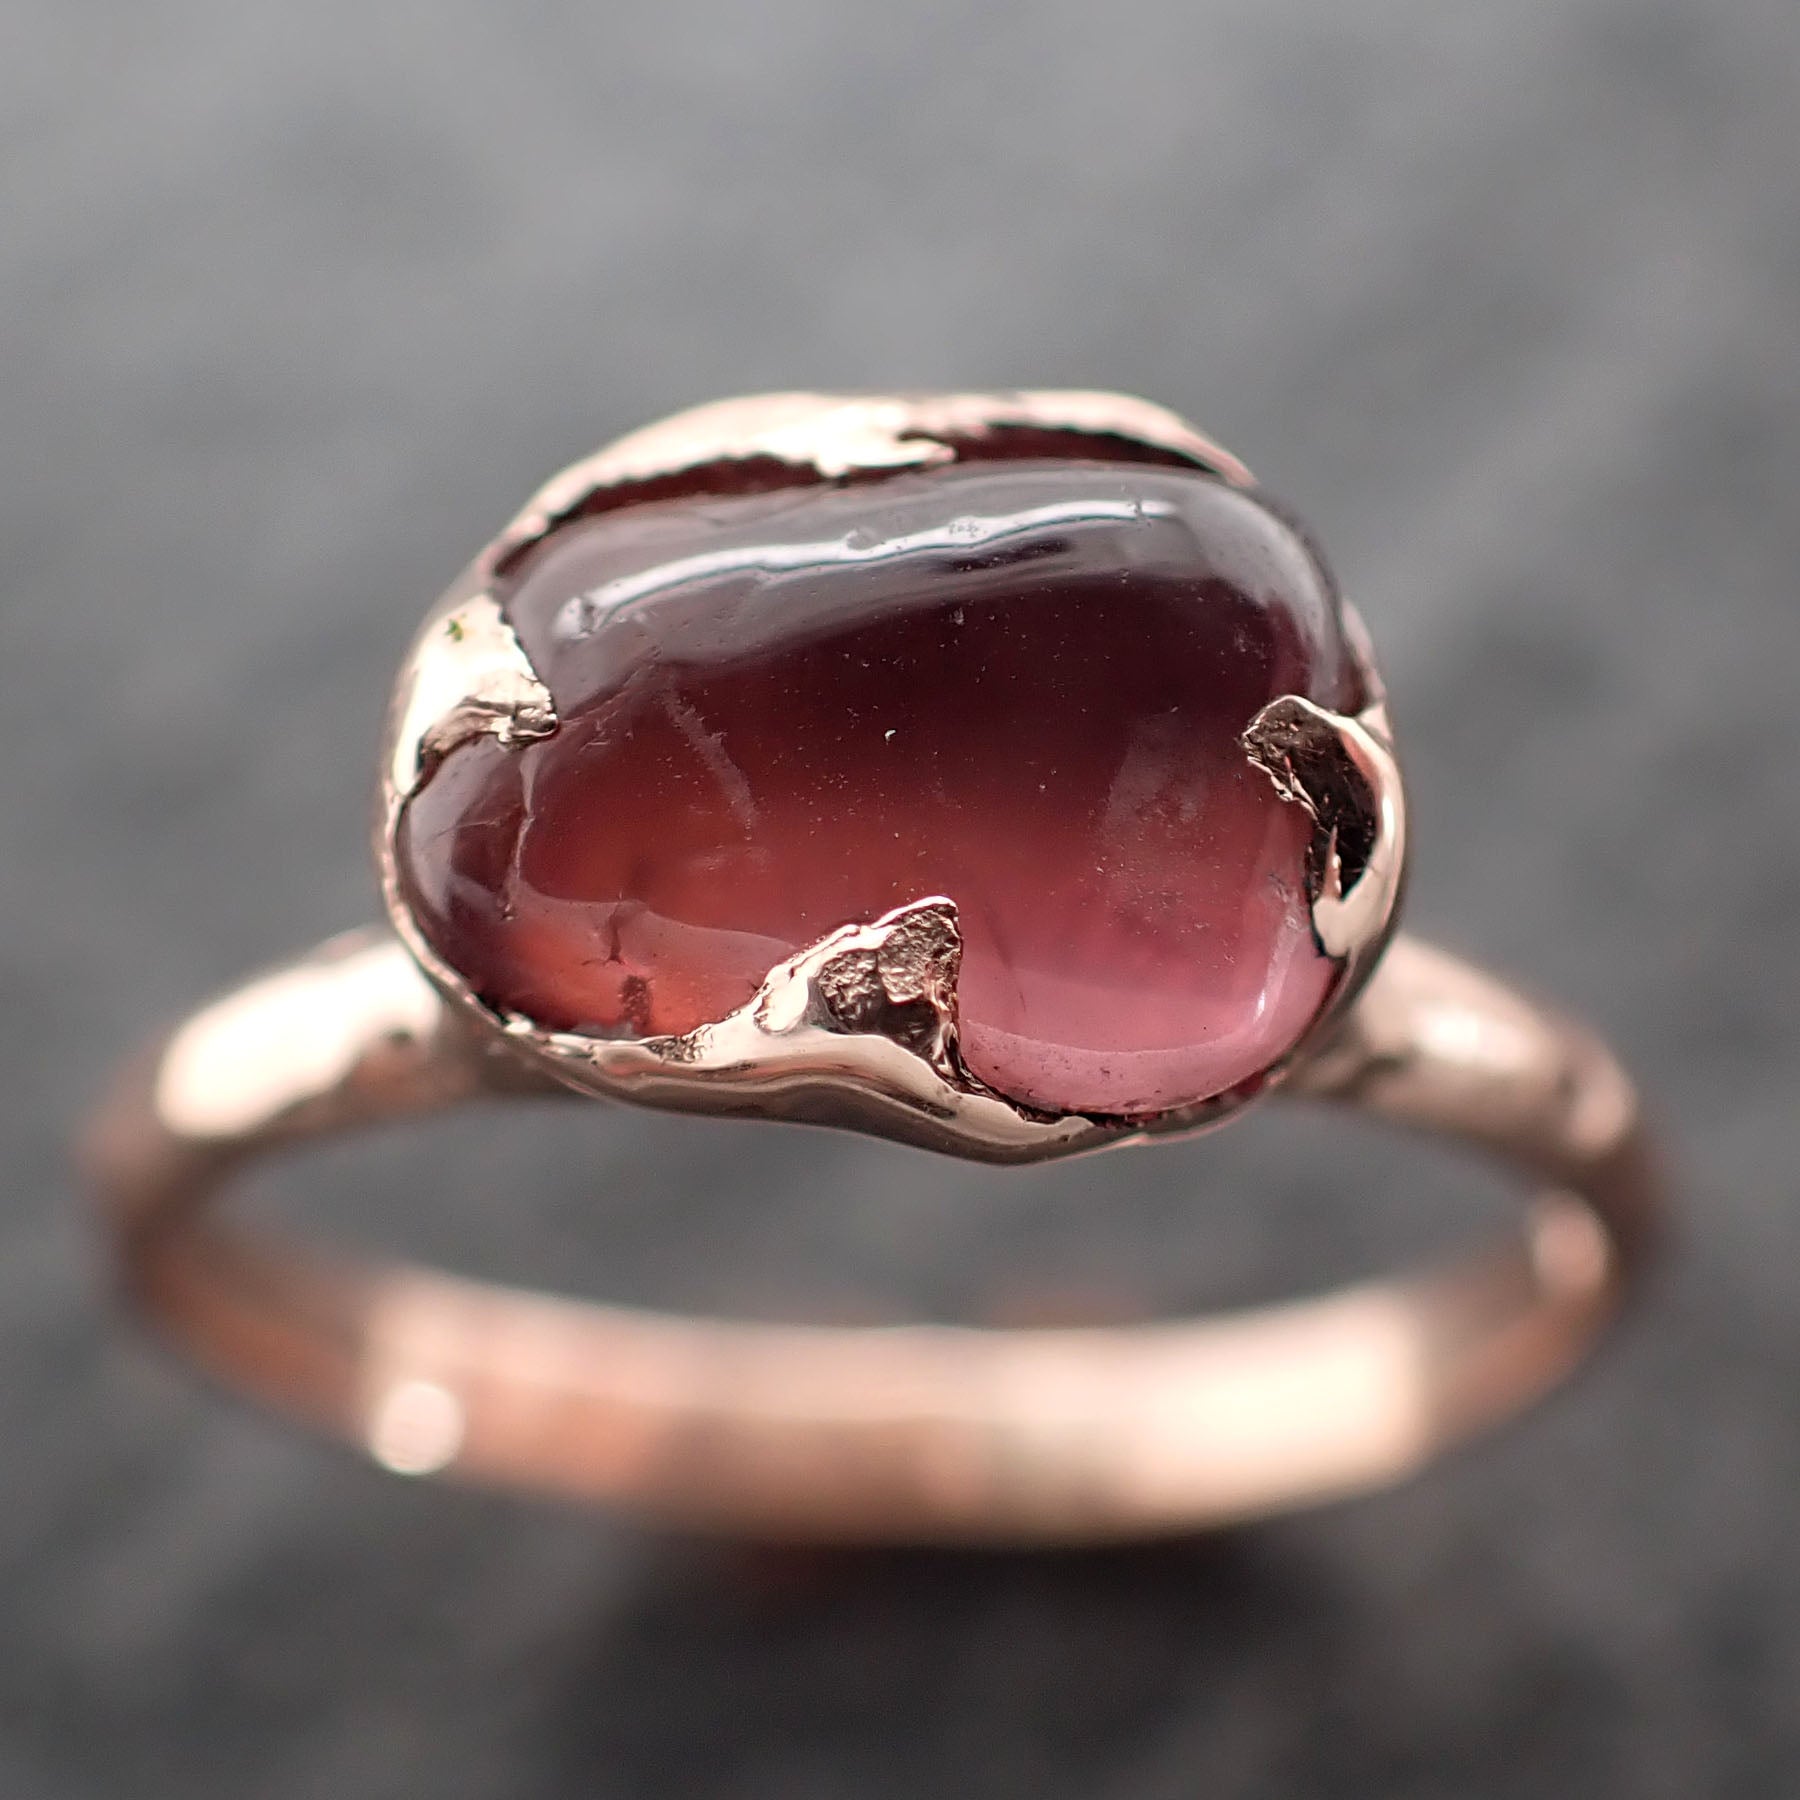 Sapphire  red tumbled 14k Rose gold Solitaire gemstone ring 2711